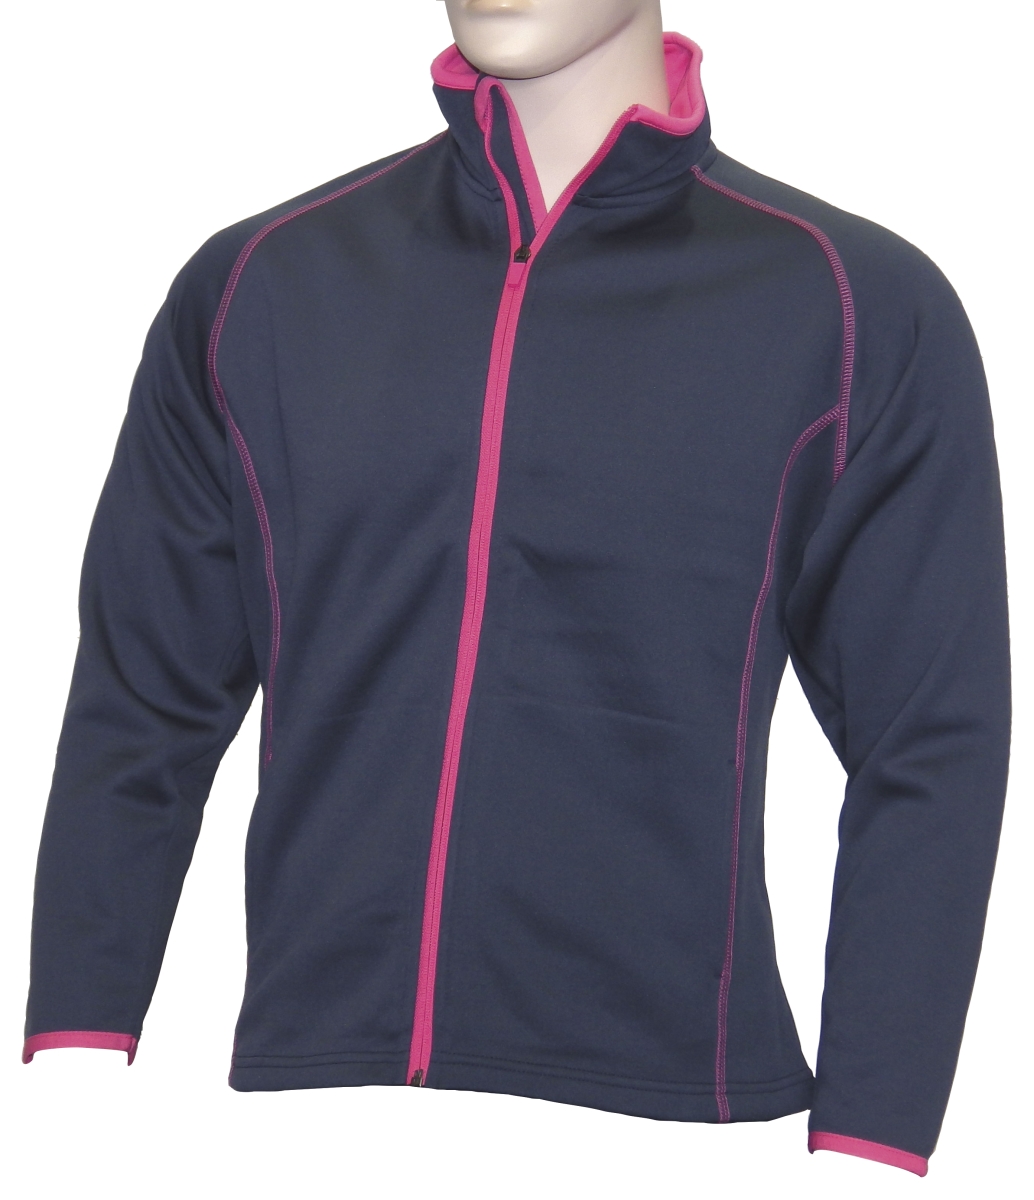 58026-051-MD Womens Poly-Spandex Jacket, Medium - Navy with Pink